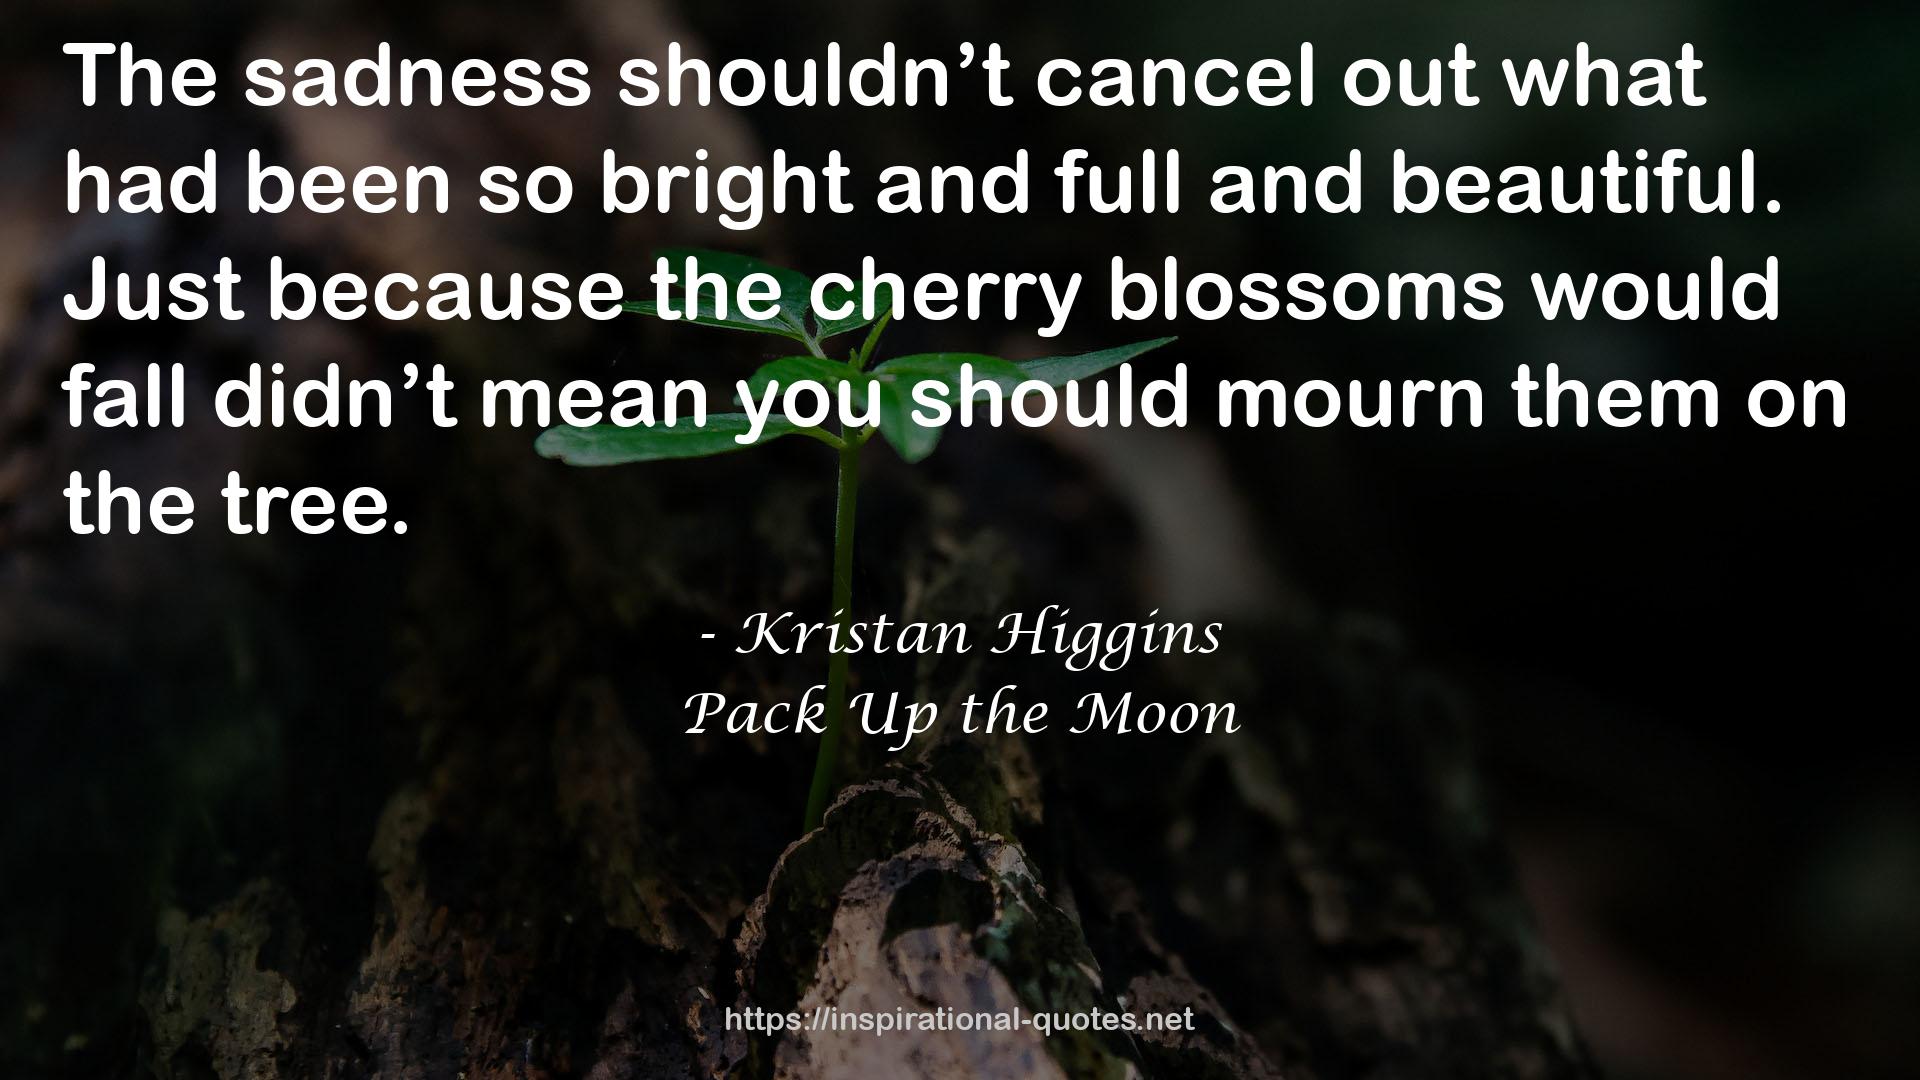 Pack Up the Moon QUOTES